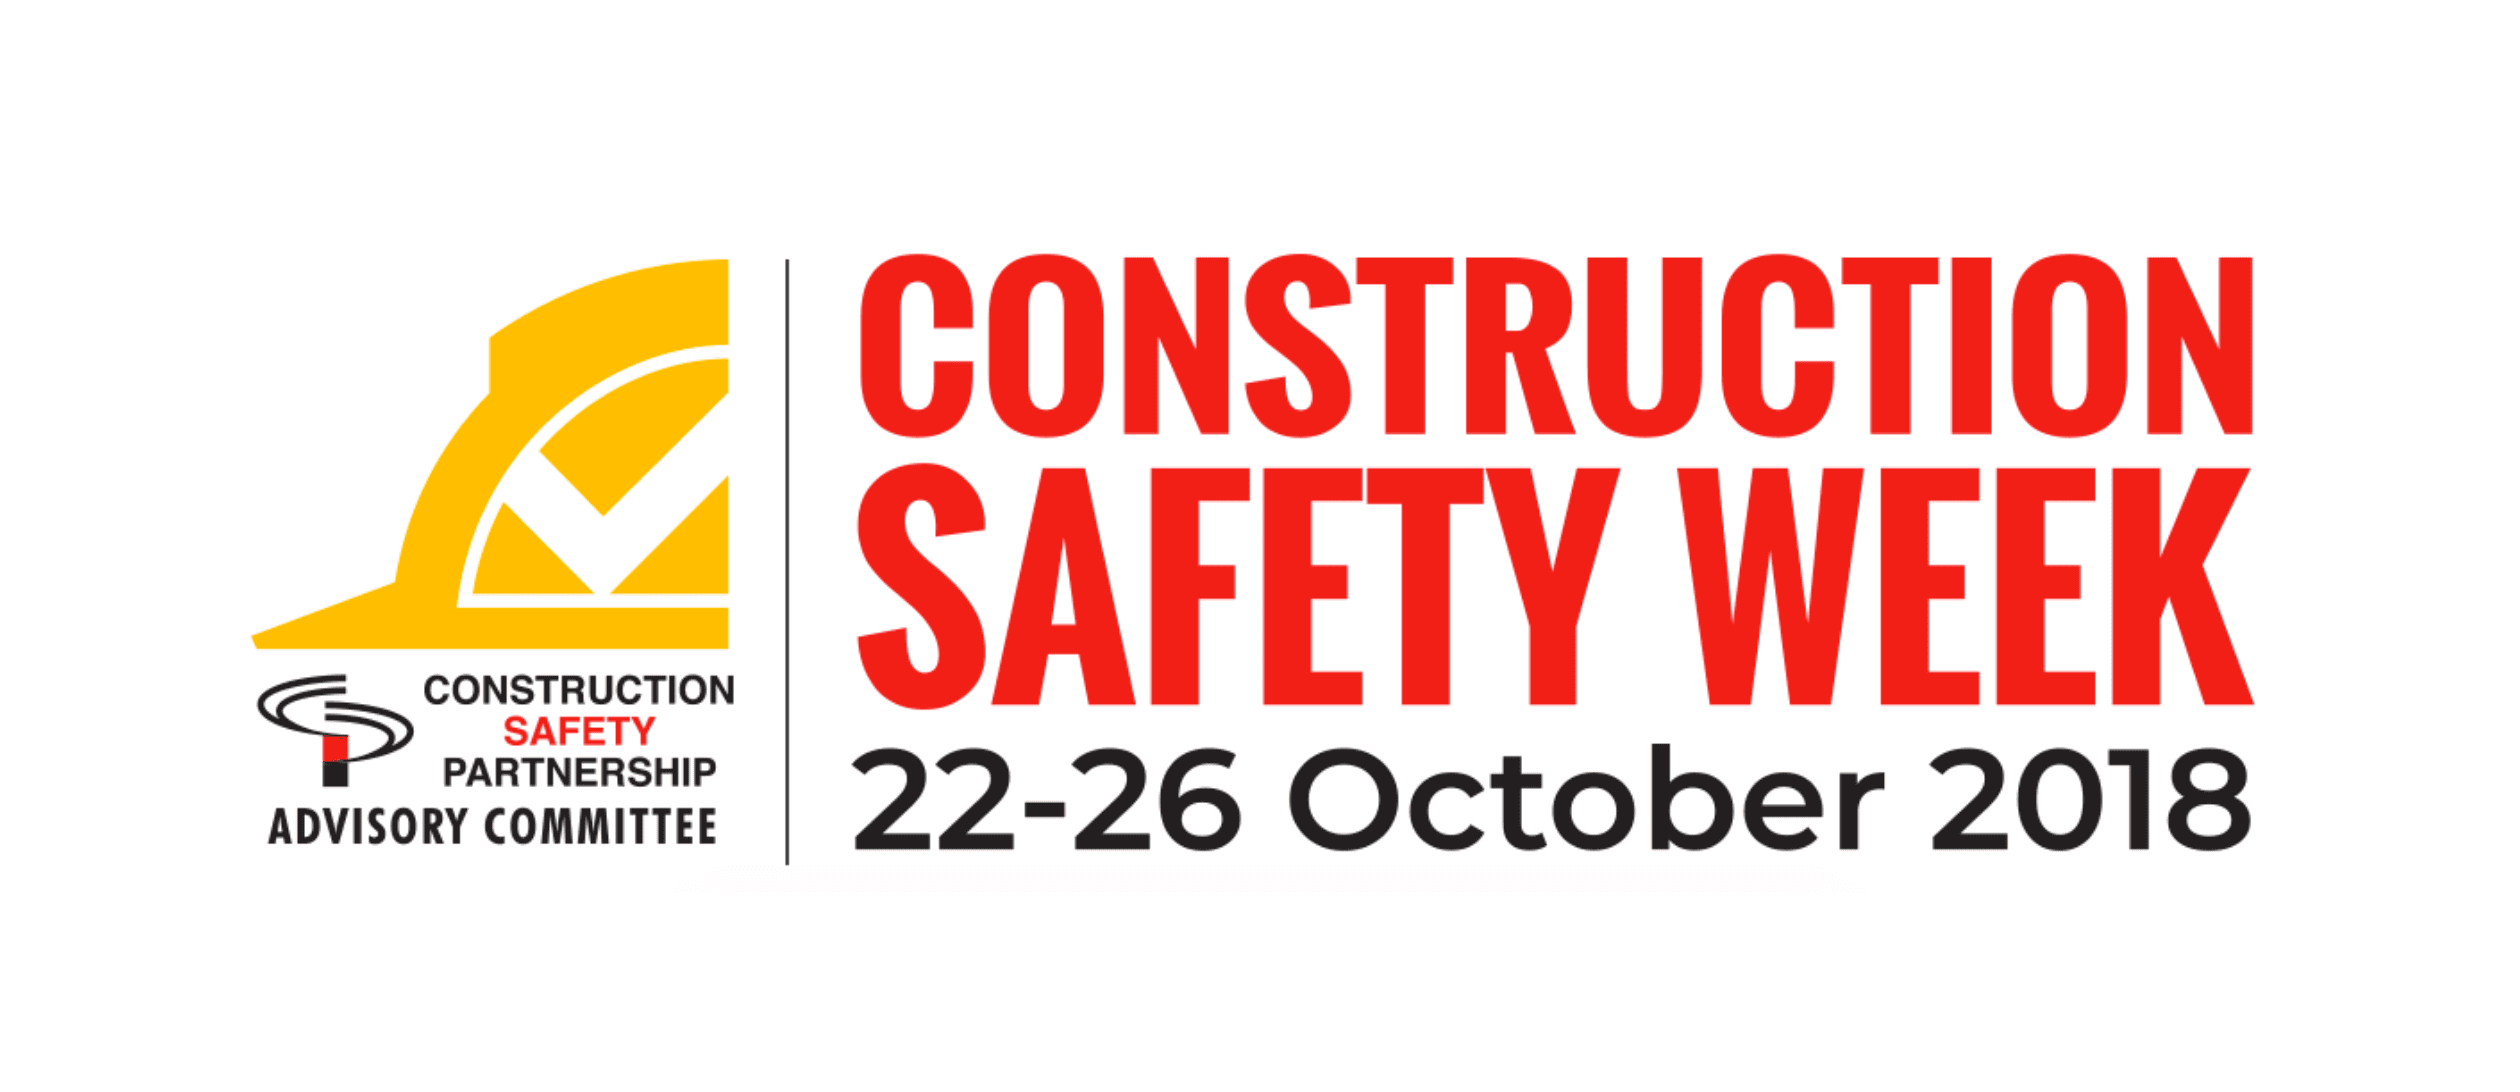 Construction Industry Federation week 2018